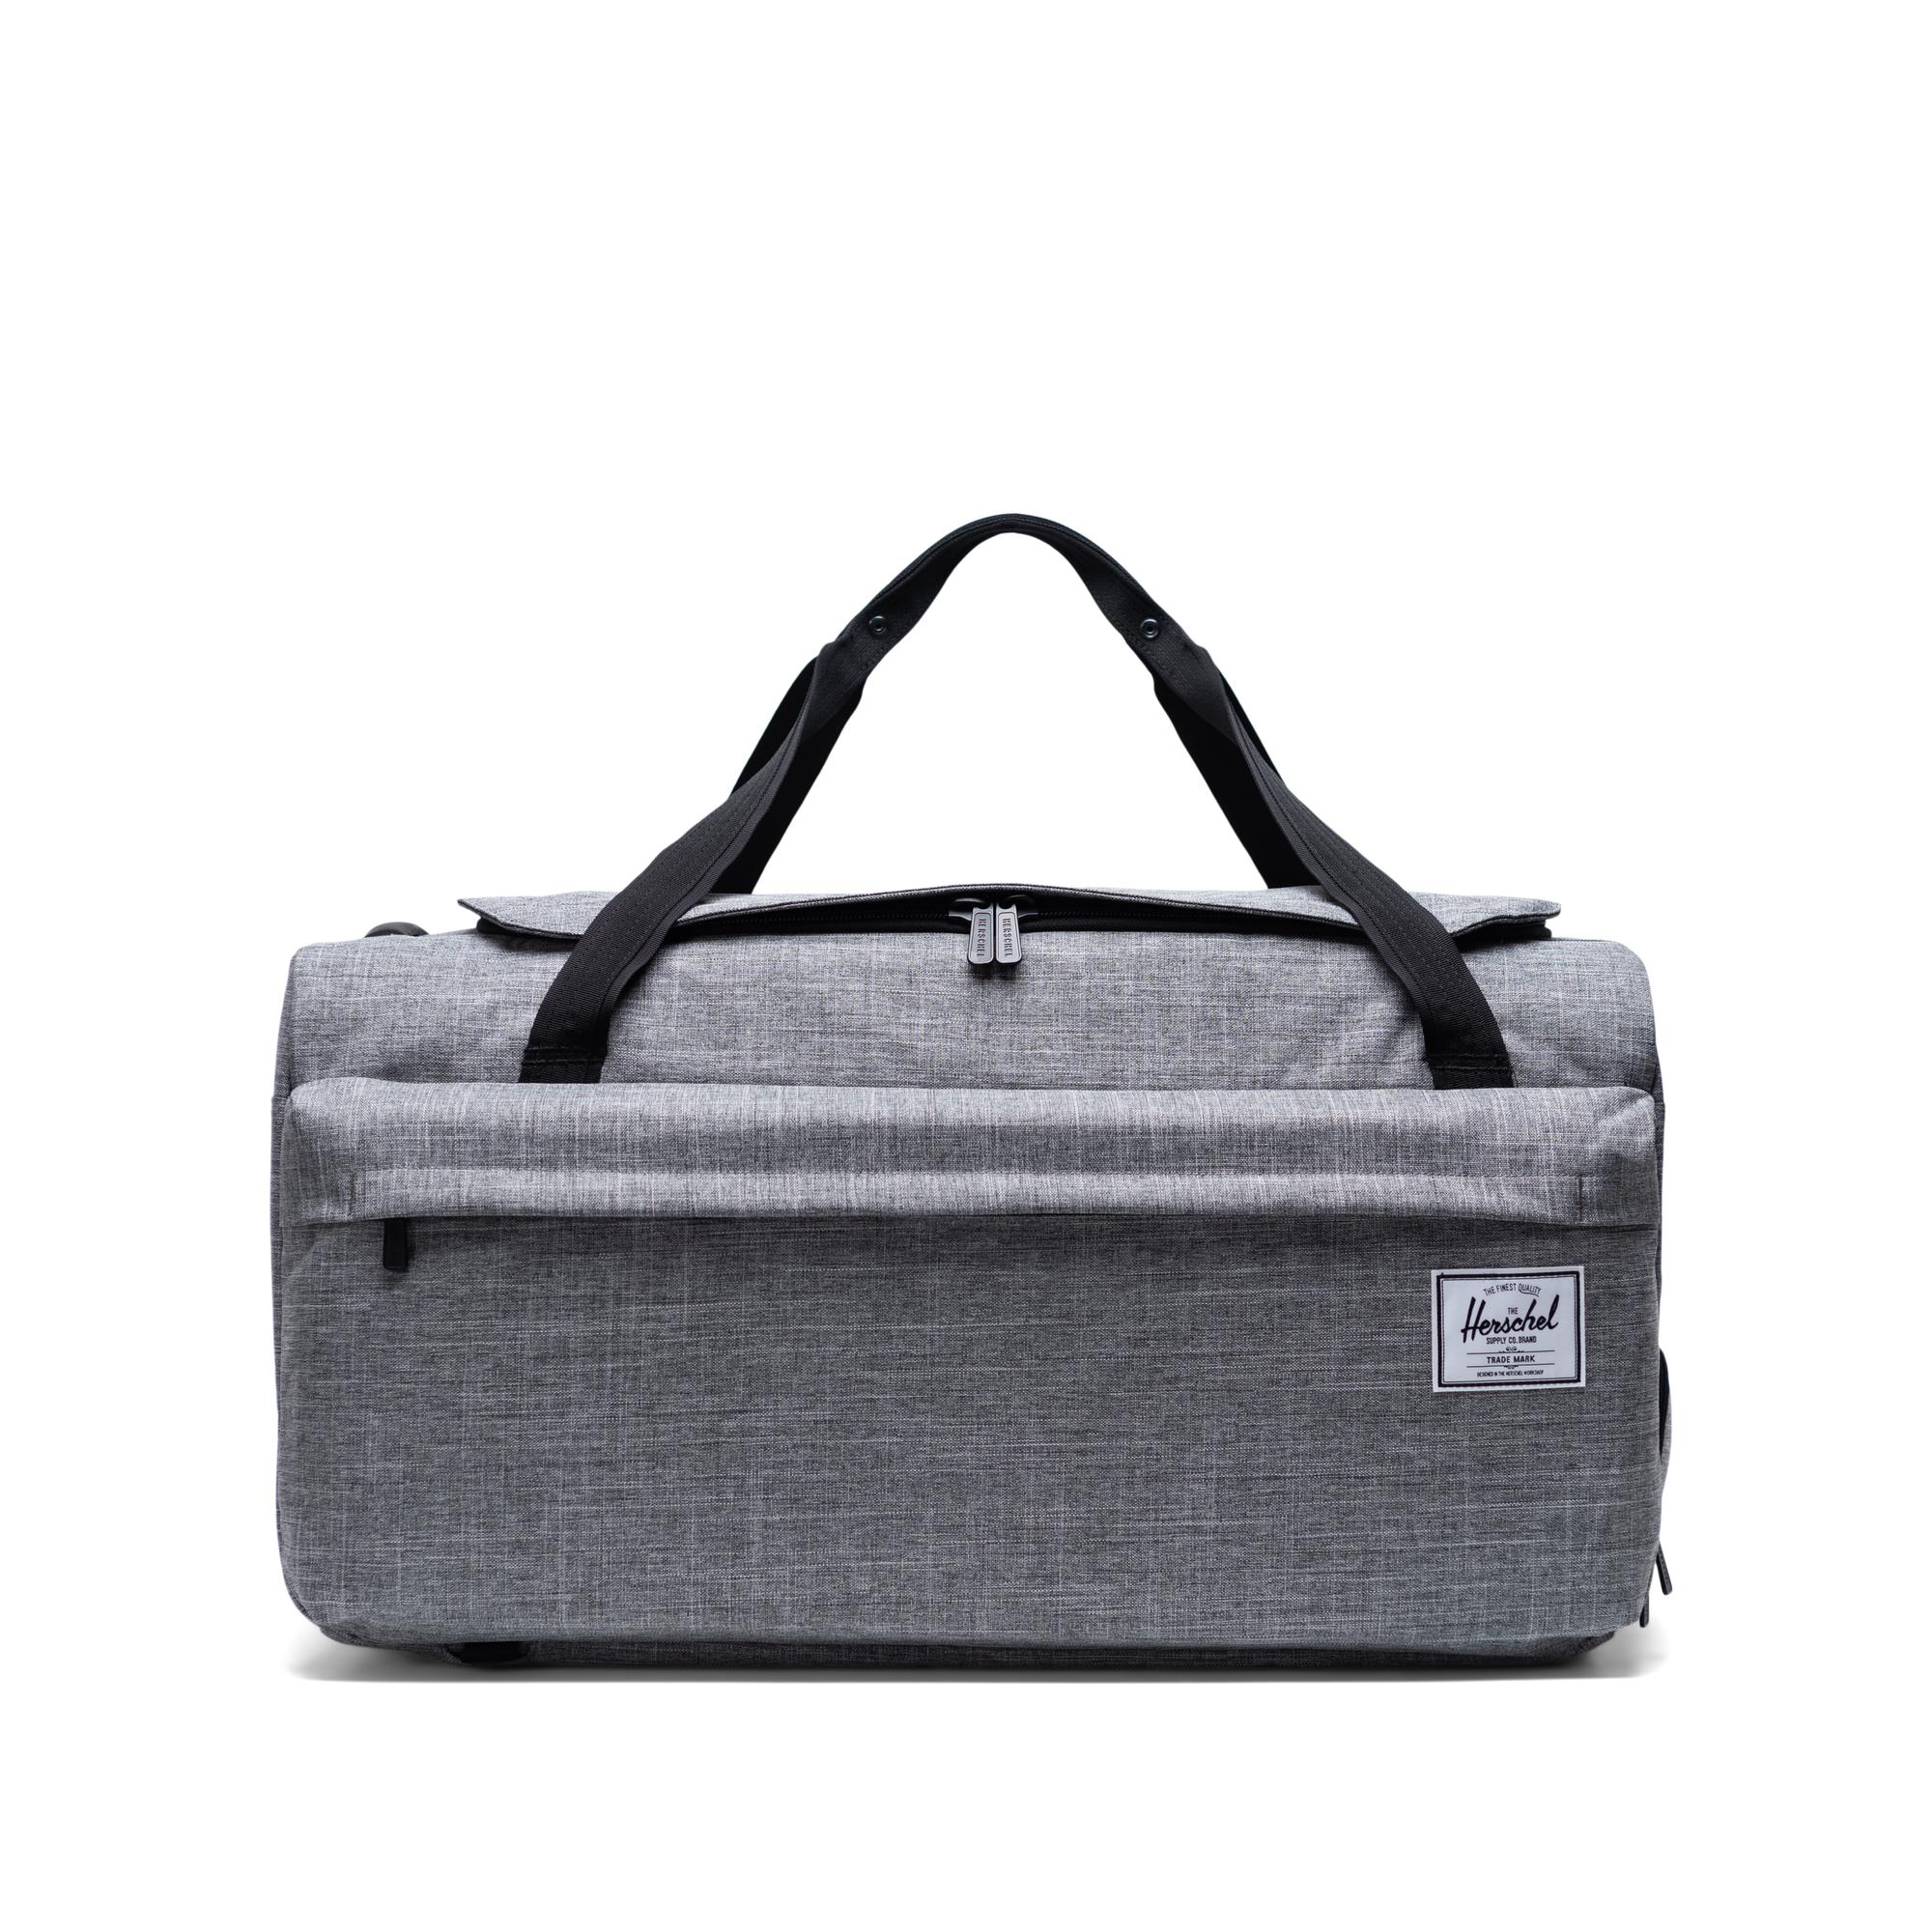 outfitter-luggage-70l